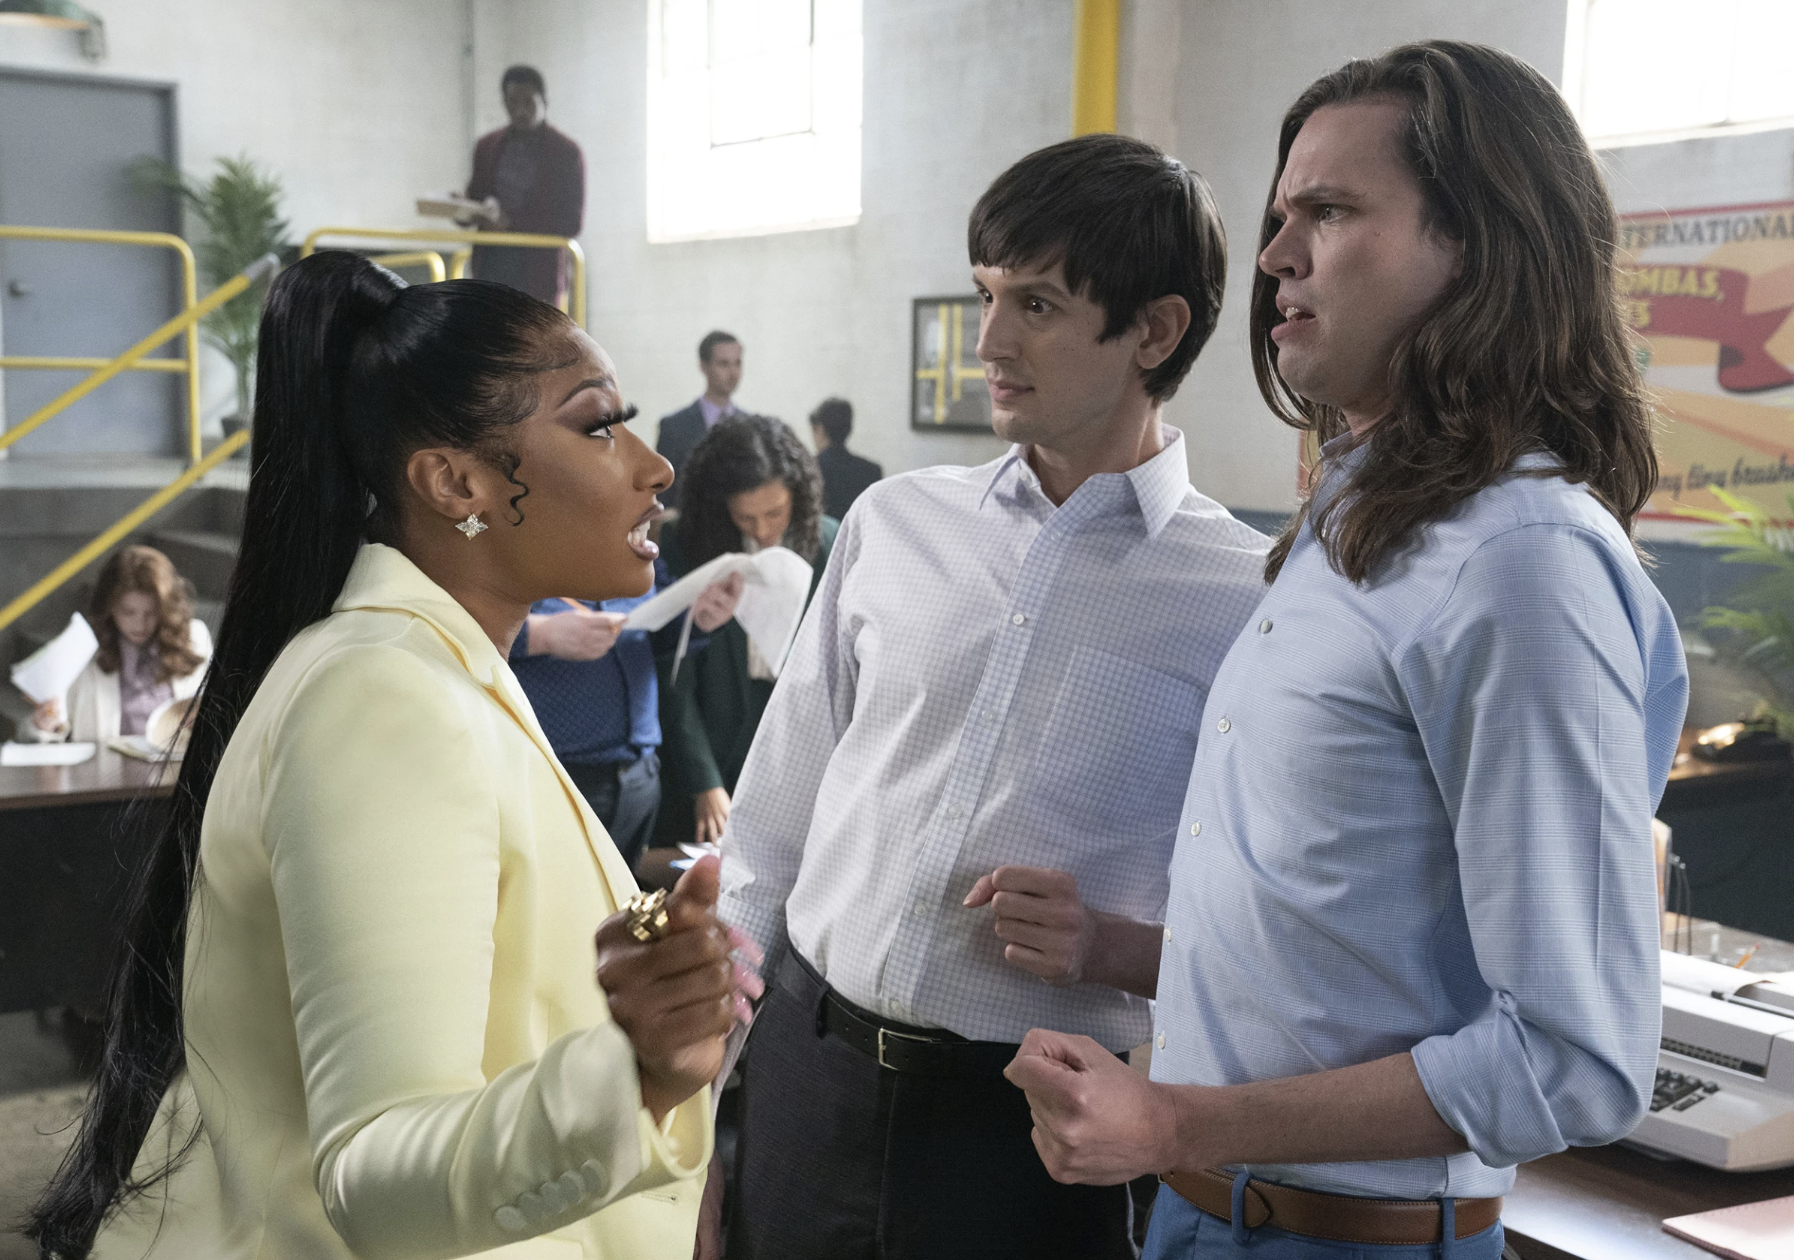 A Black woman wearing a pale yellow business suit leans in and admonishes two shocked looking white men wearing button down shirts and pants.